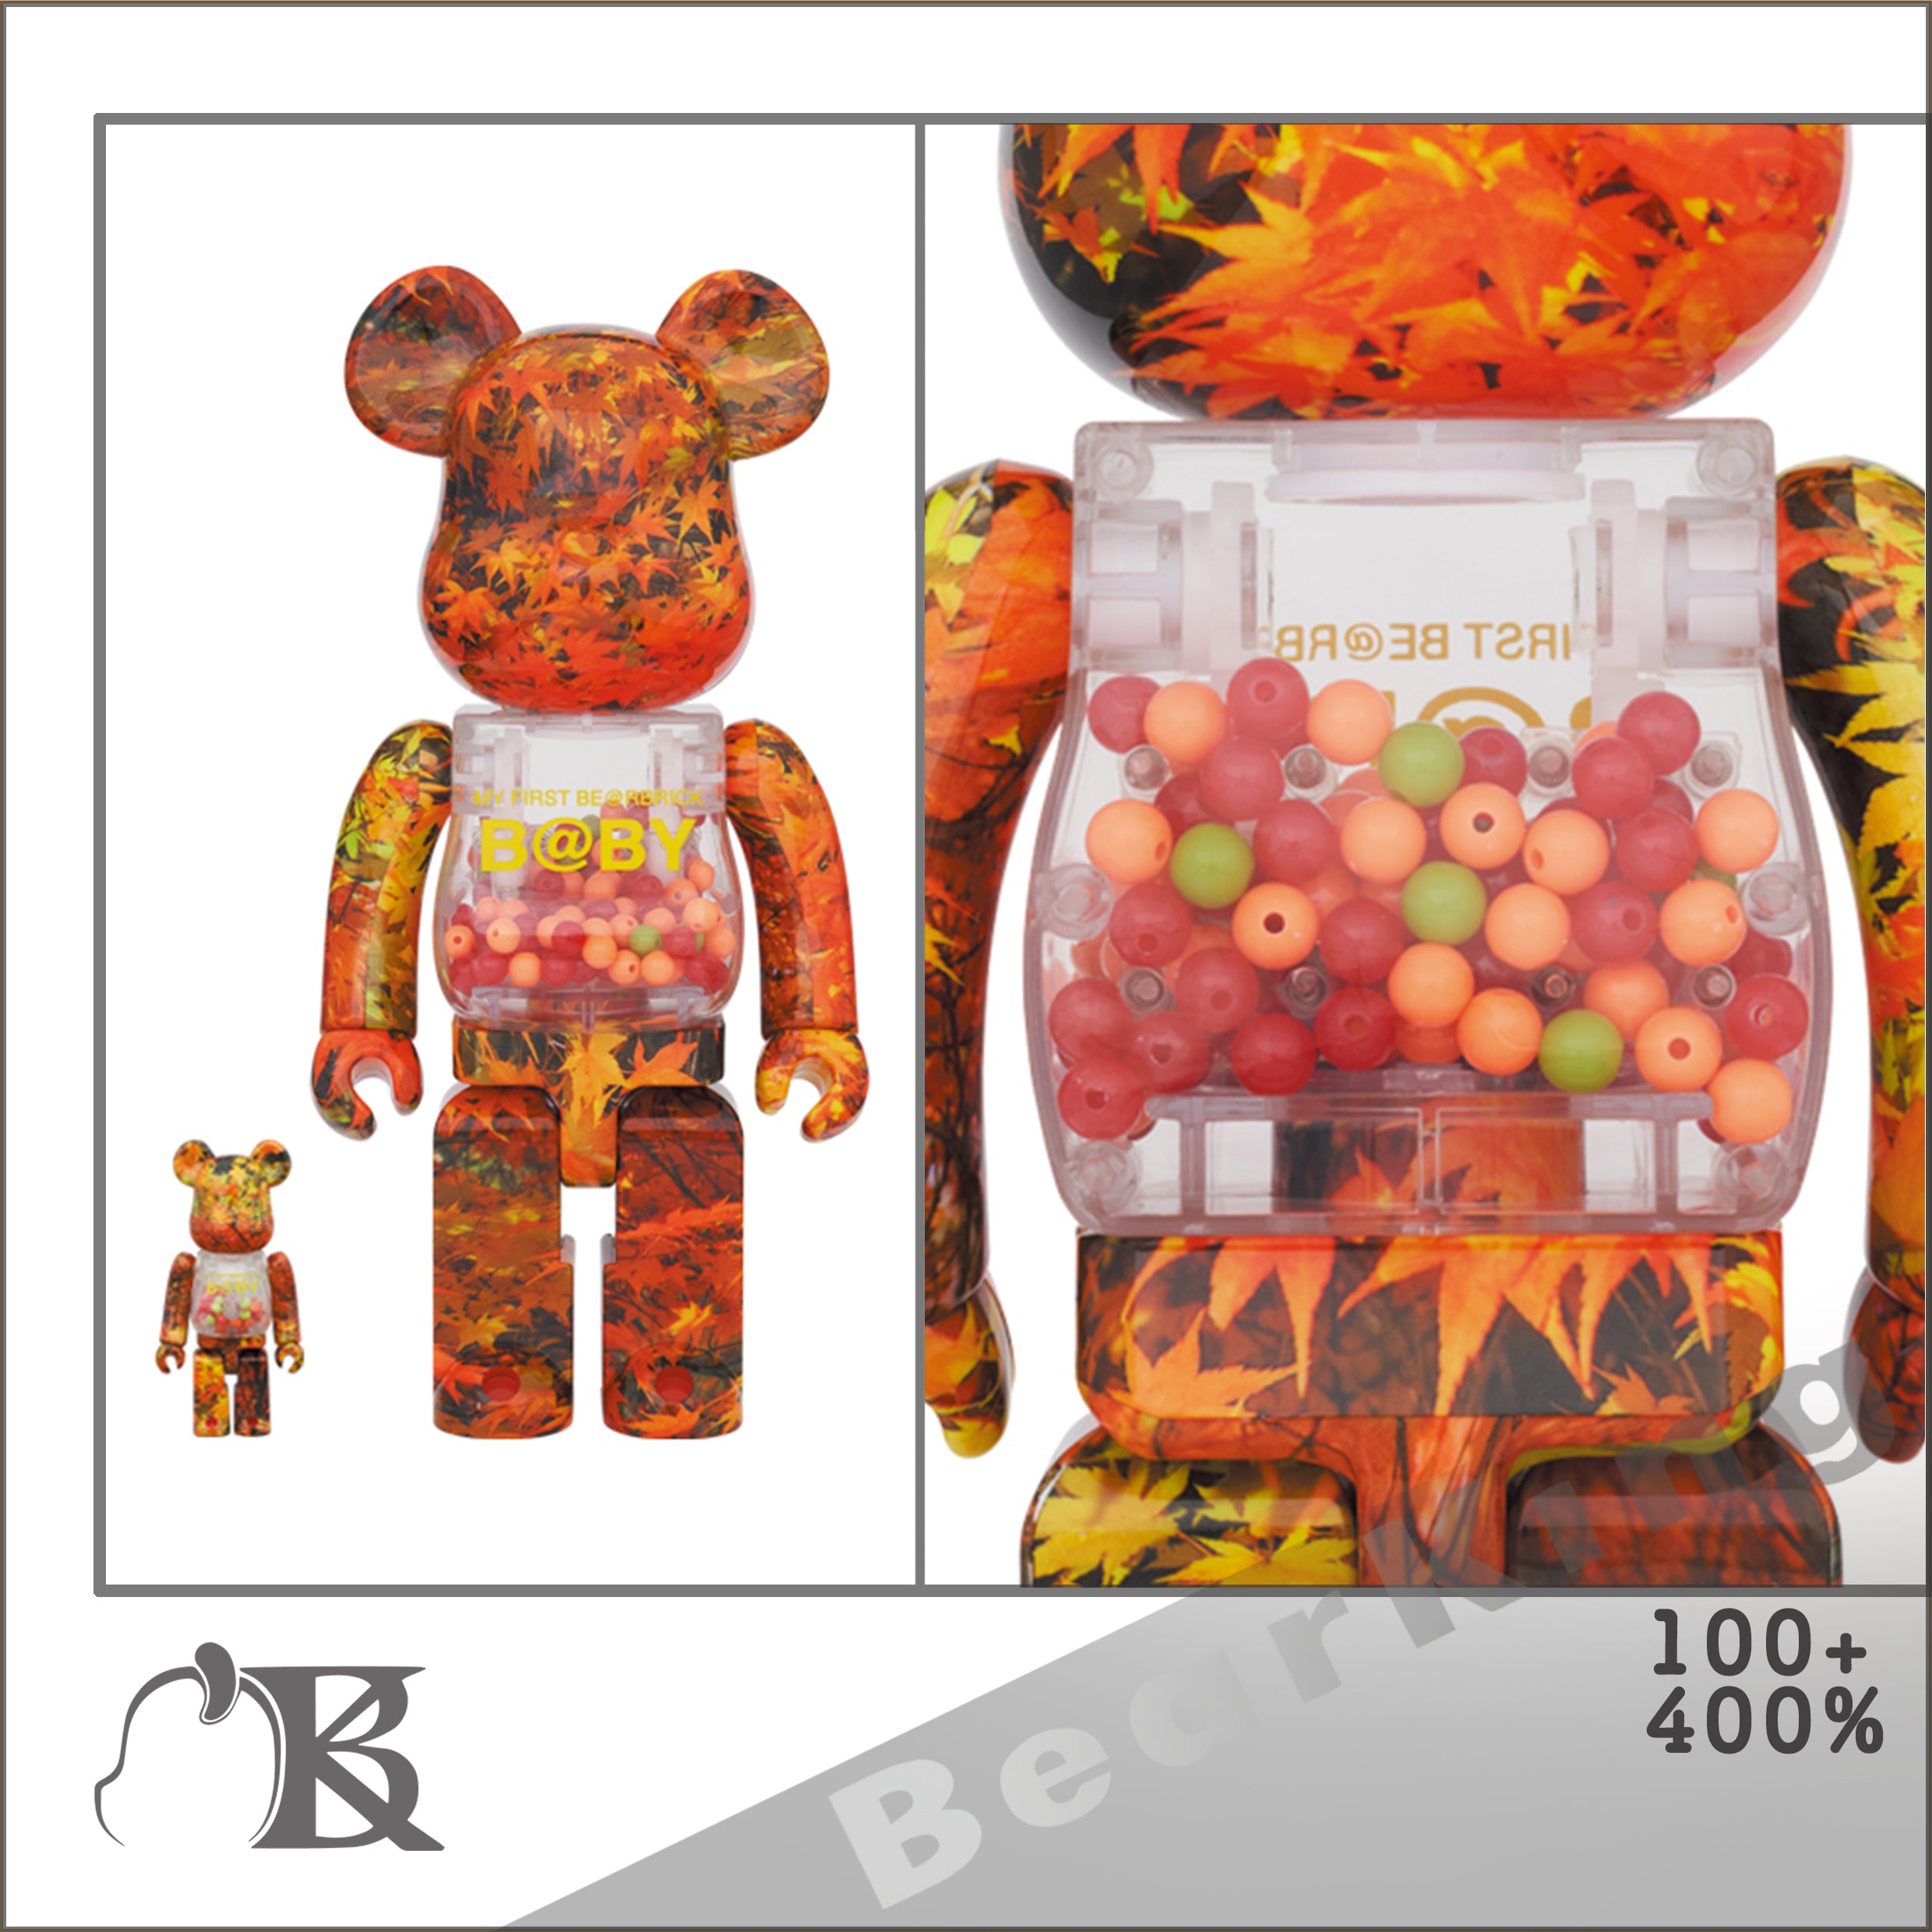 MY FIRST BE@RBRICK B@BY AUTUMN LEAVES Ver. 100％ & 400％ 千秋 baby 楓葉